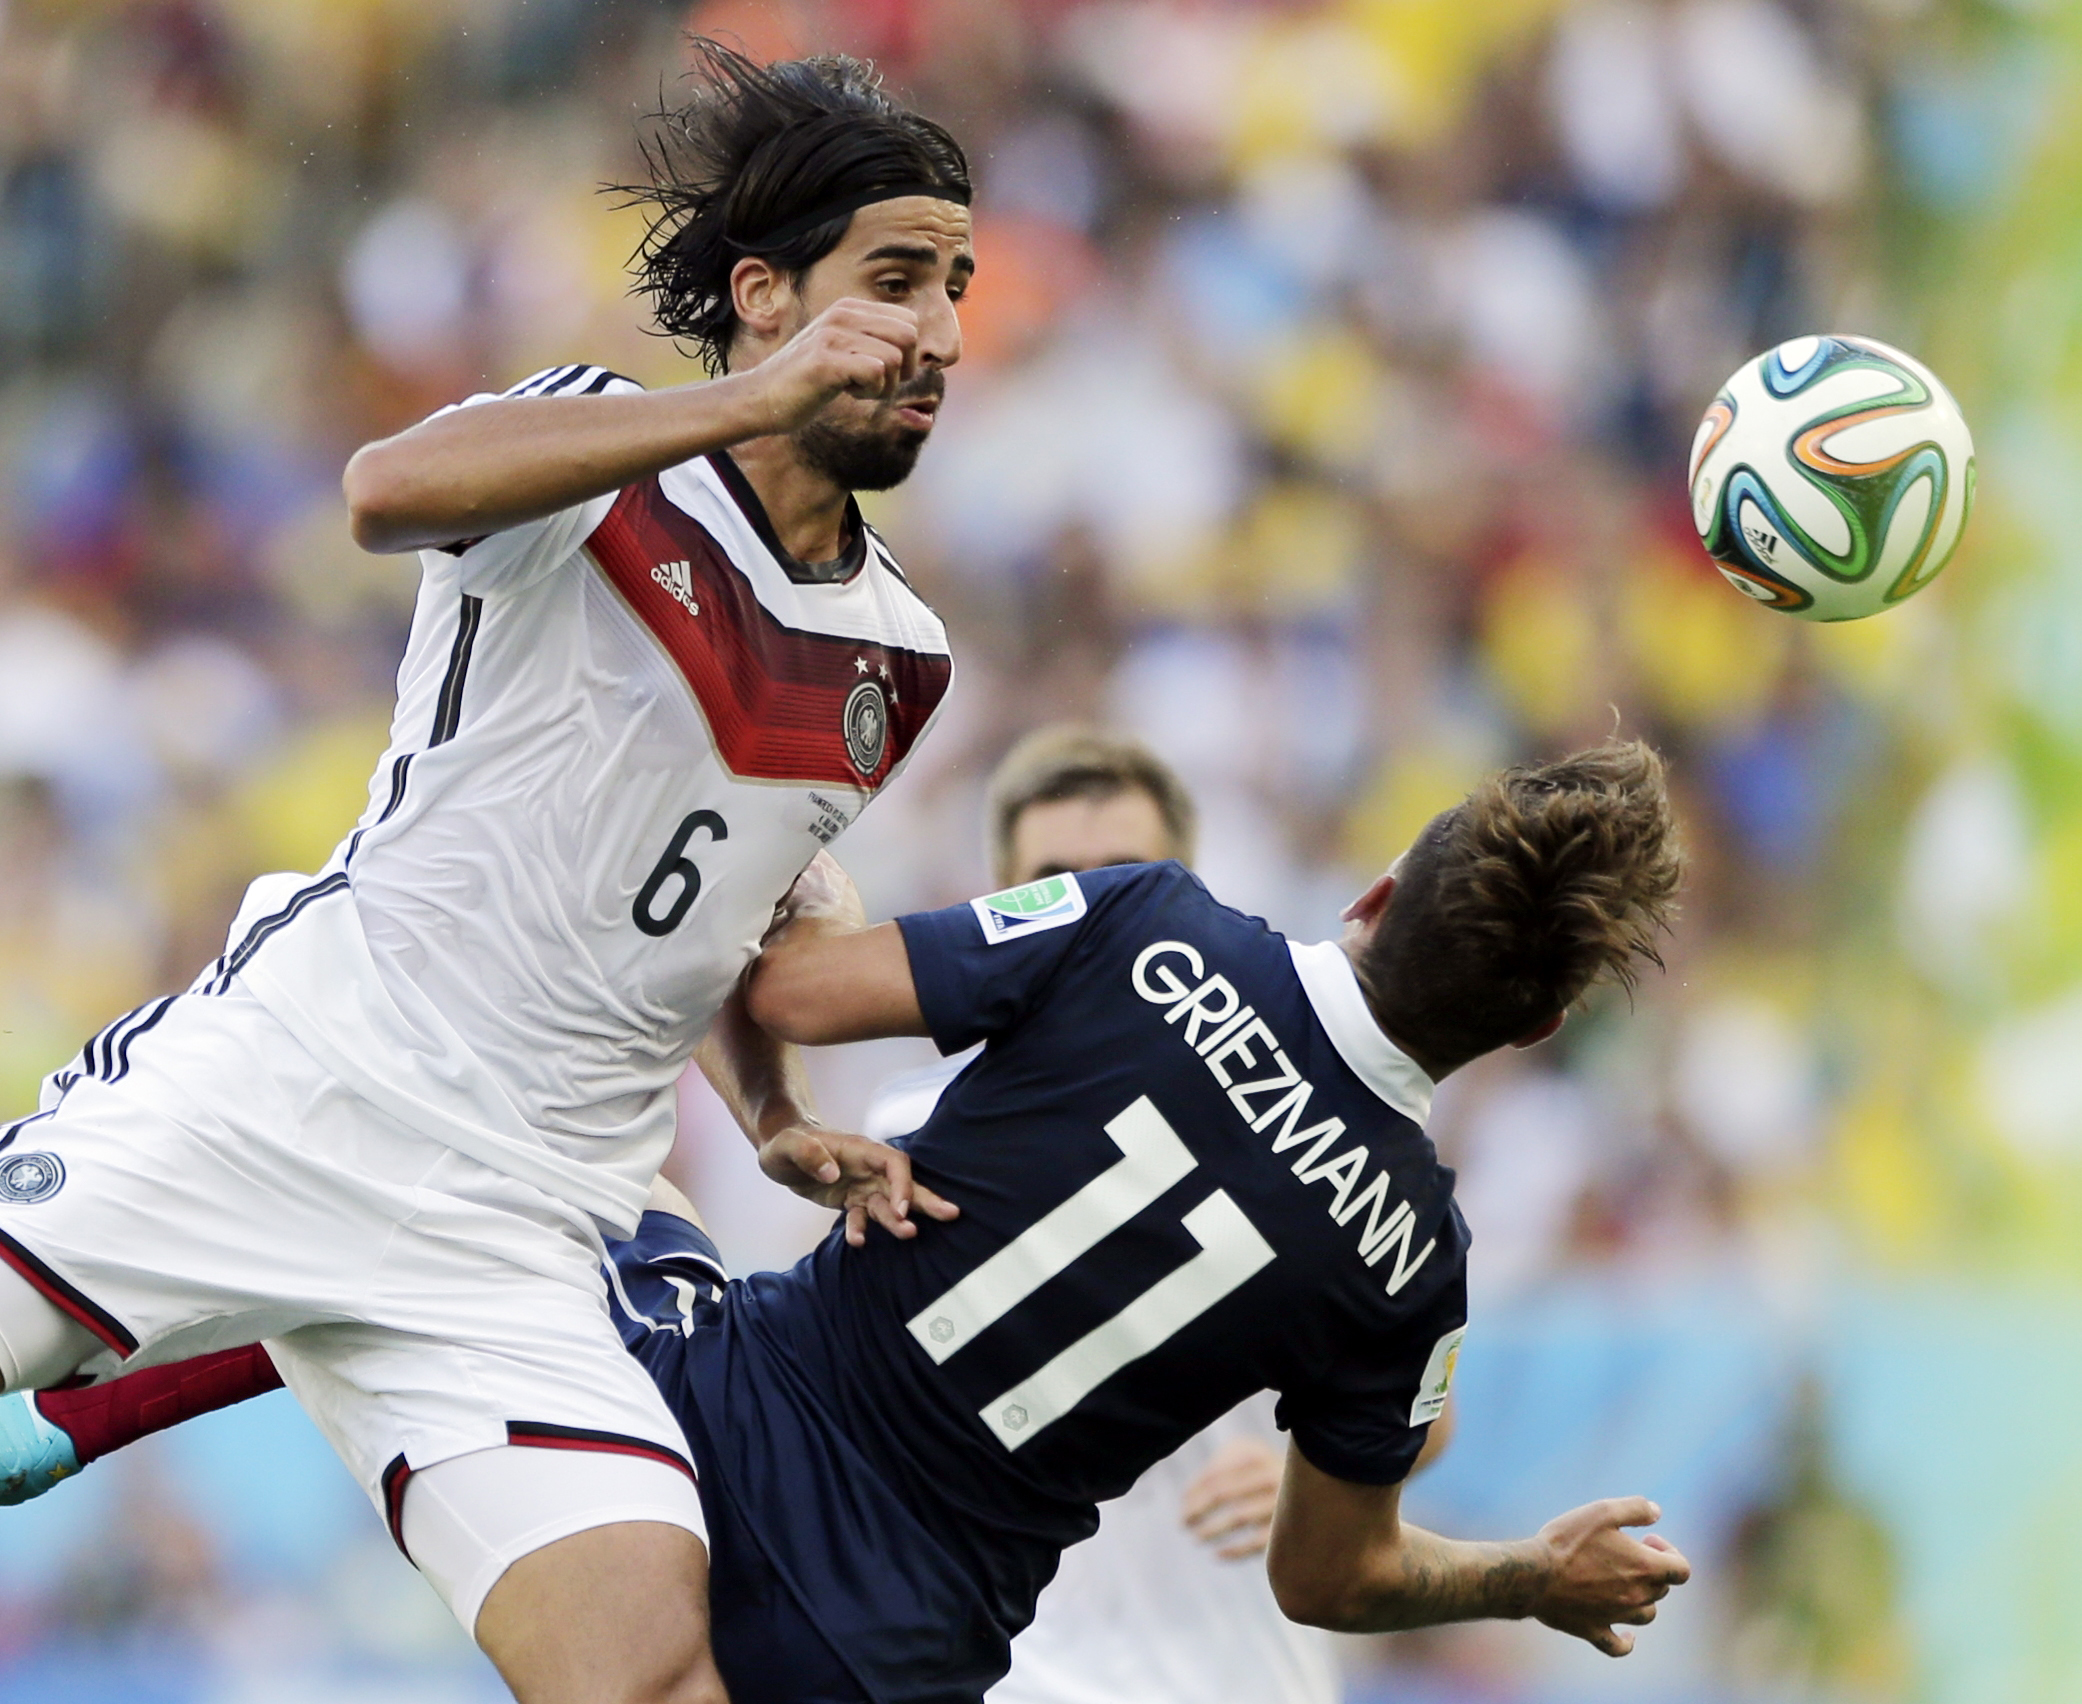 PHOTO: Germany's Sami Khedira heads the ball against France's Antoine Griezmann during the World Cup quarterfinal soccer match at the Maracana Stadium in Rio de Janeiro, Brazil, July 4, 2014.